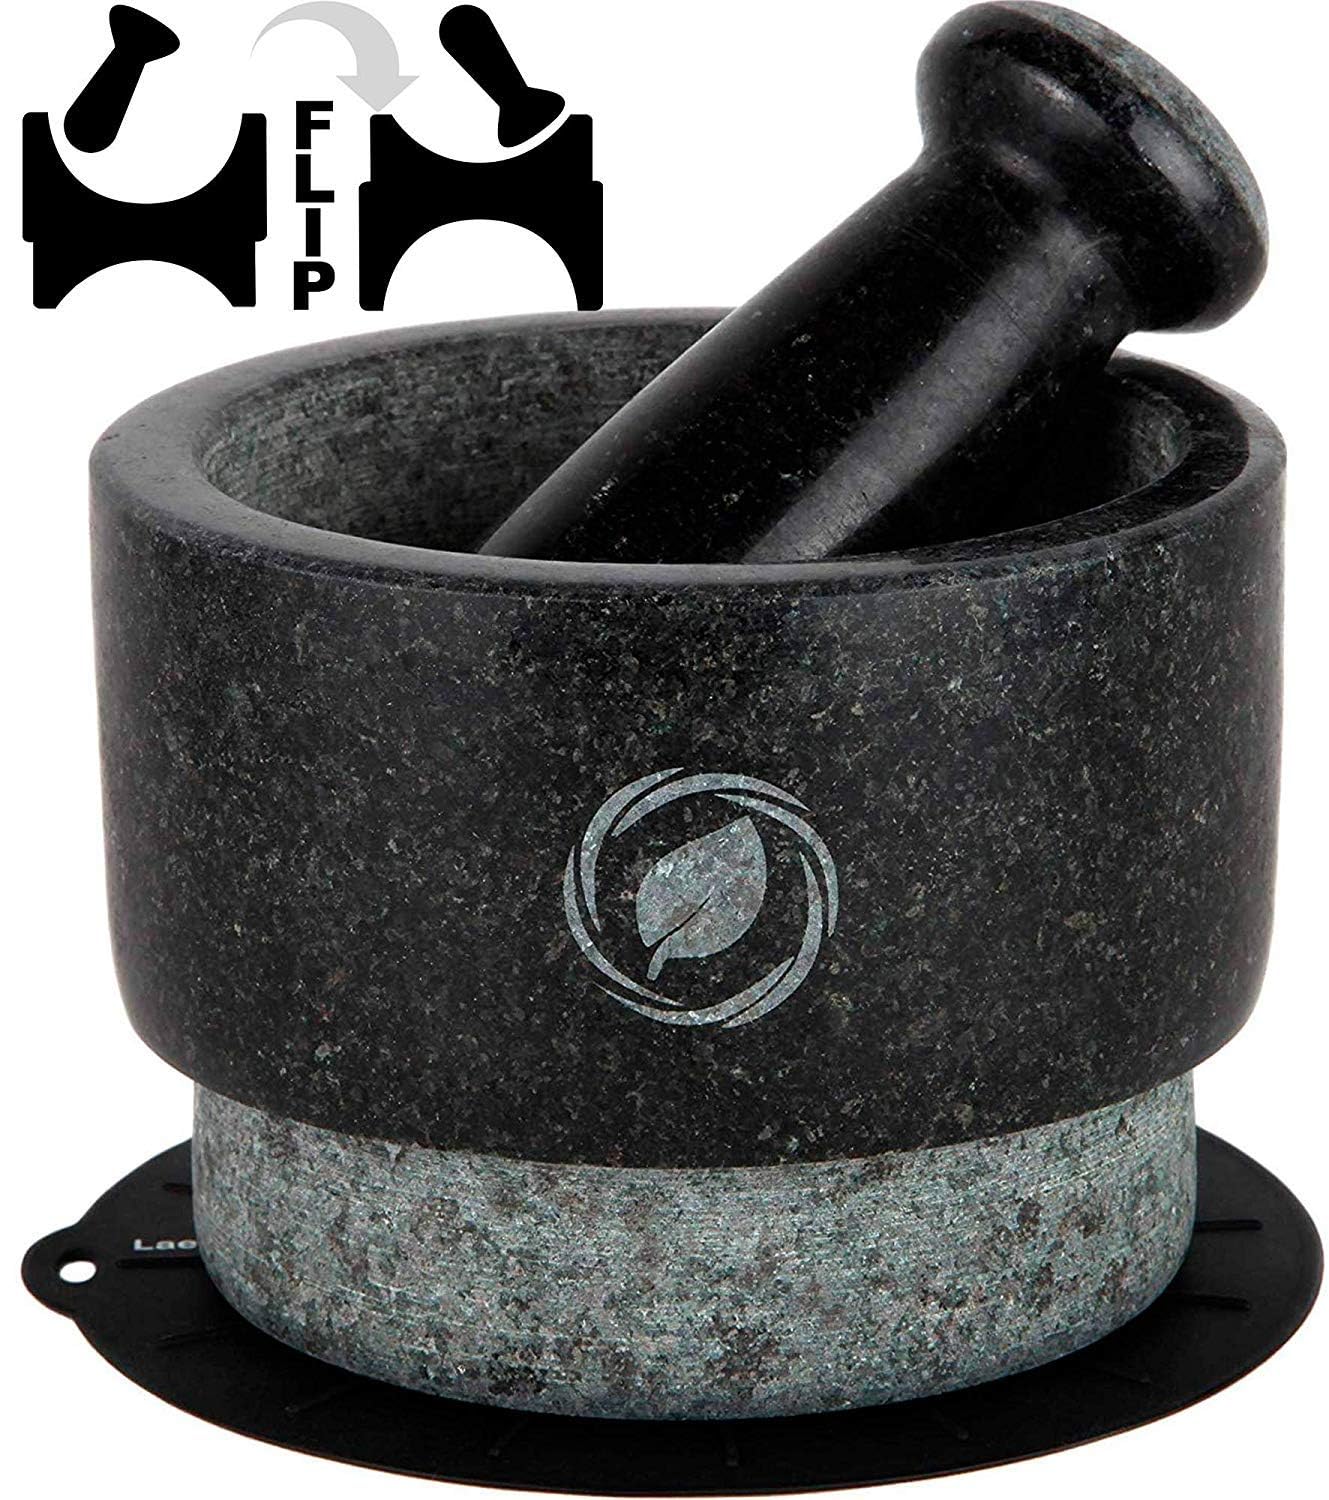 Laevo Mortar and Pestle Set (Large) | Stone Spice Grinder | 2.1 Cup Capacity | 5.5 inch | Reversible | Molcajete Mexicano | Guacamole, Pesto, Spices | Large Mortar & Pestles | Gift Set  - Acceptable